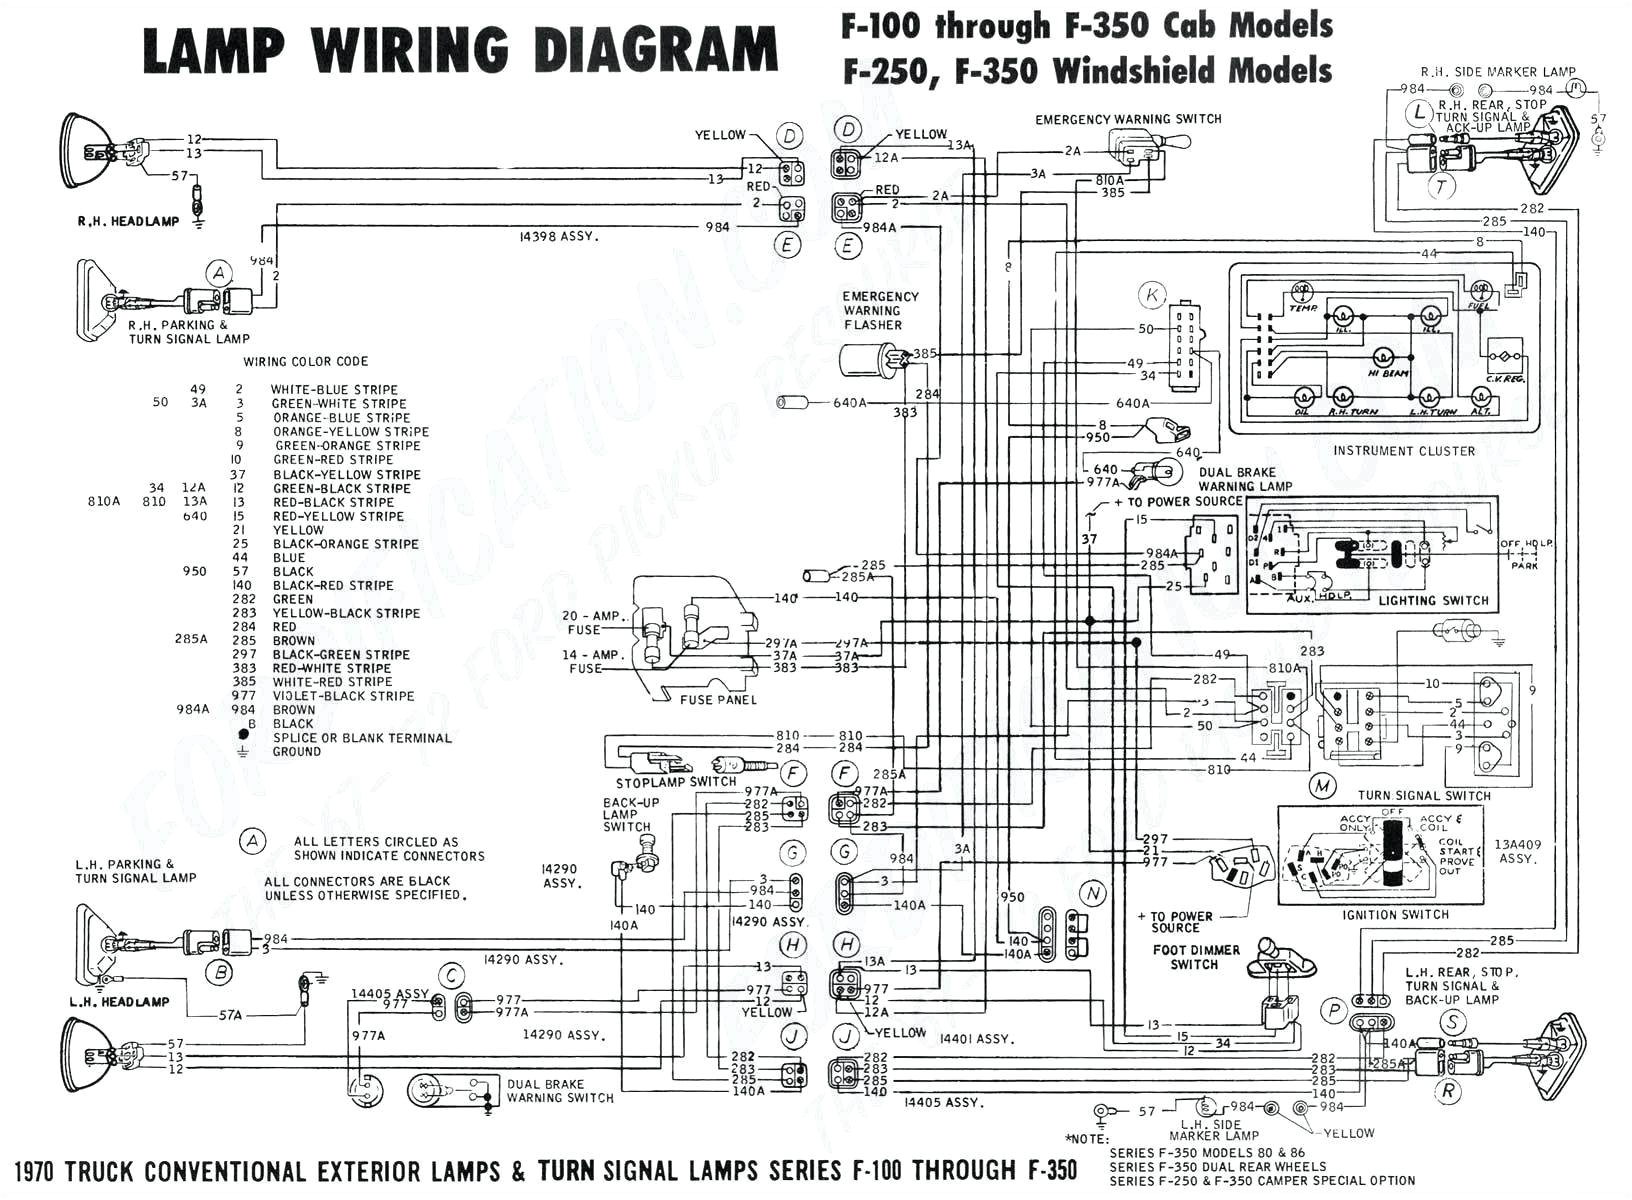 98 e150 starter wiring wiring diagram pass 2006 ford e150 obd2 wireing diagrams